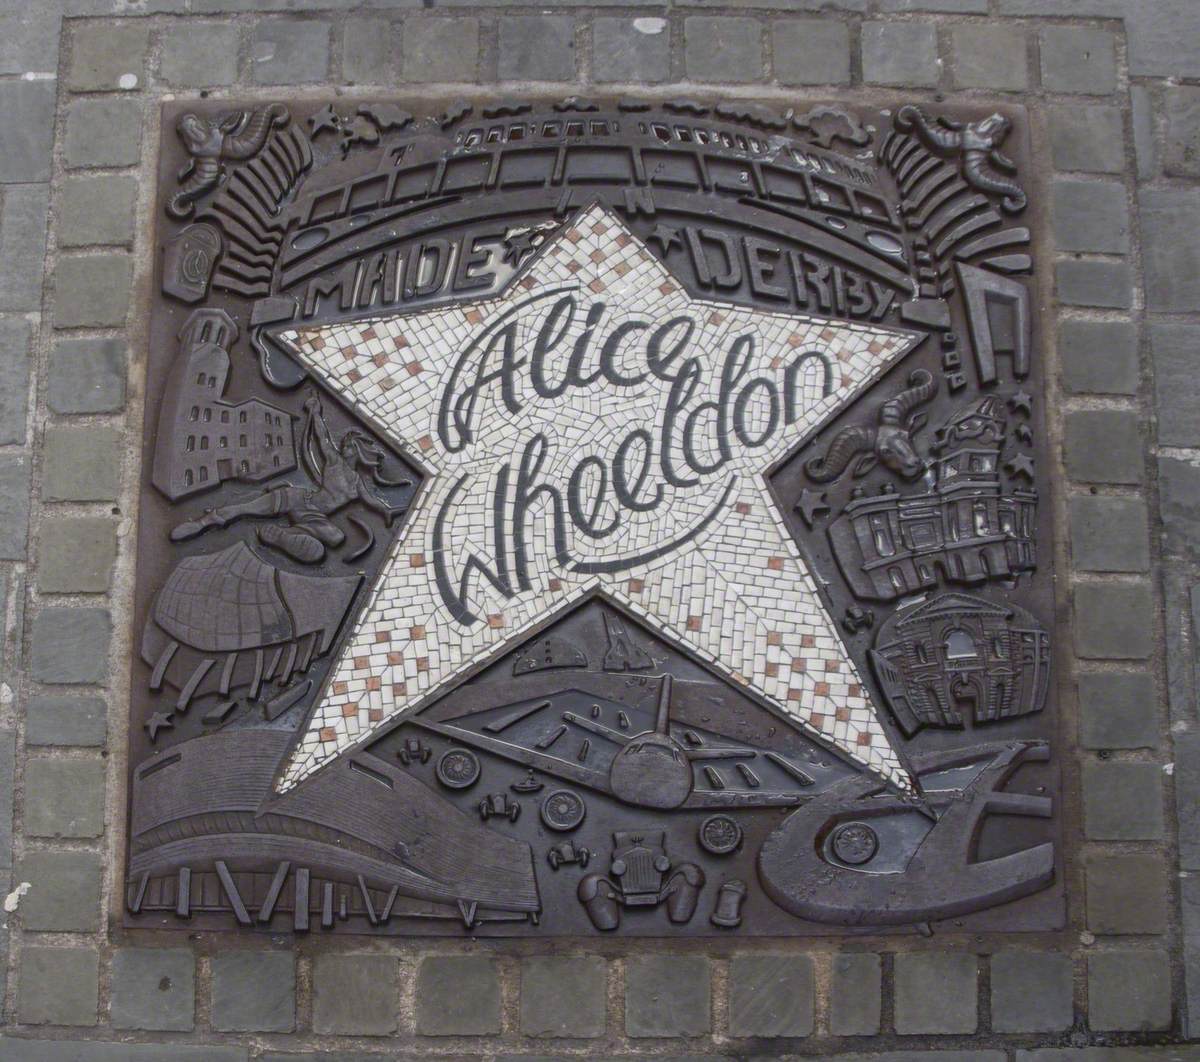 Made in Derby Walk of Fame 1